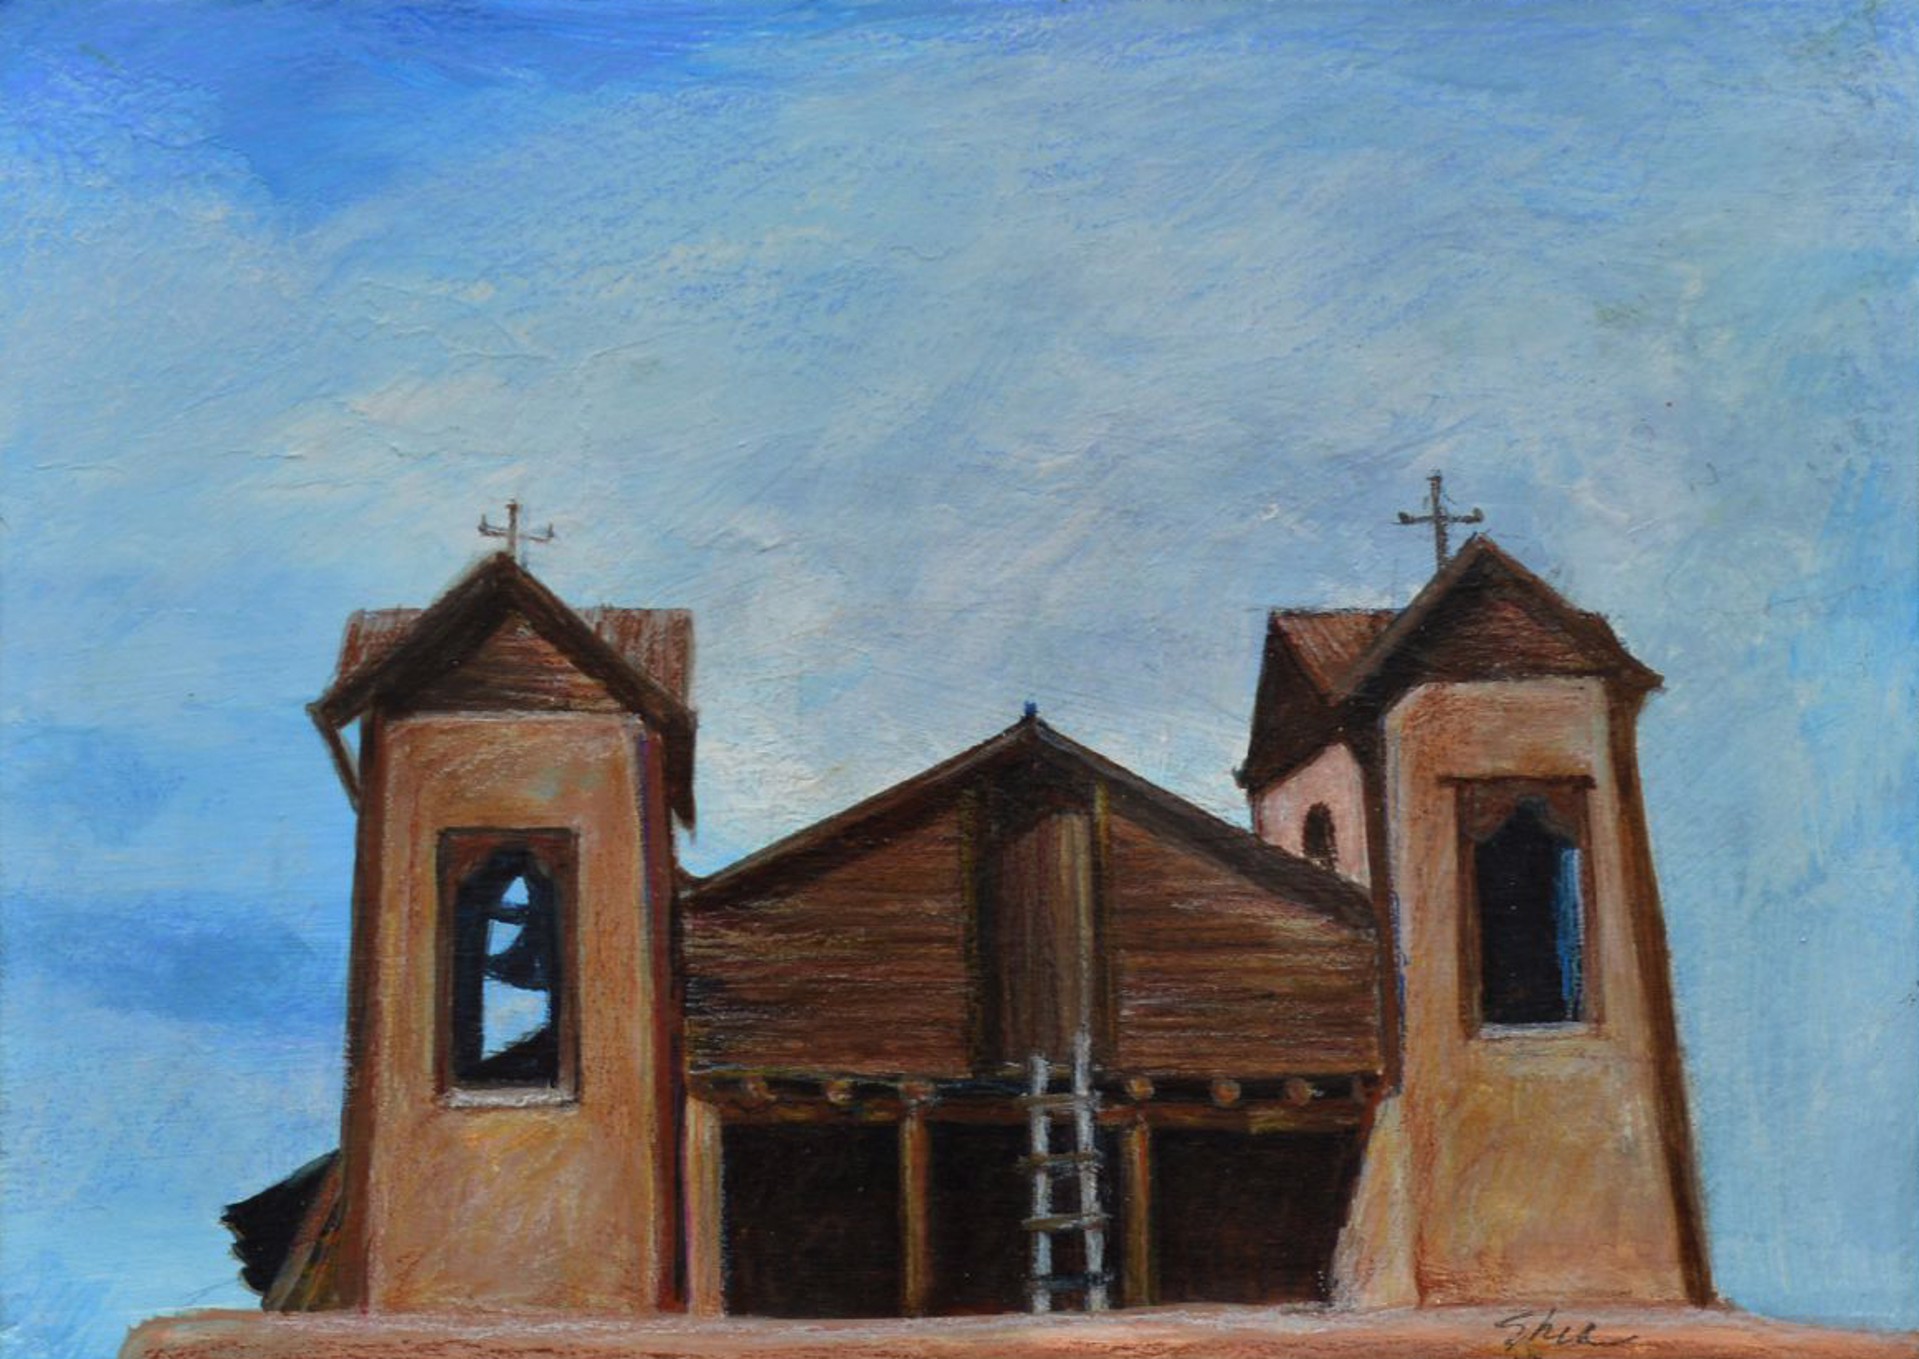 Chimayo Bell Towers by Jane Shea